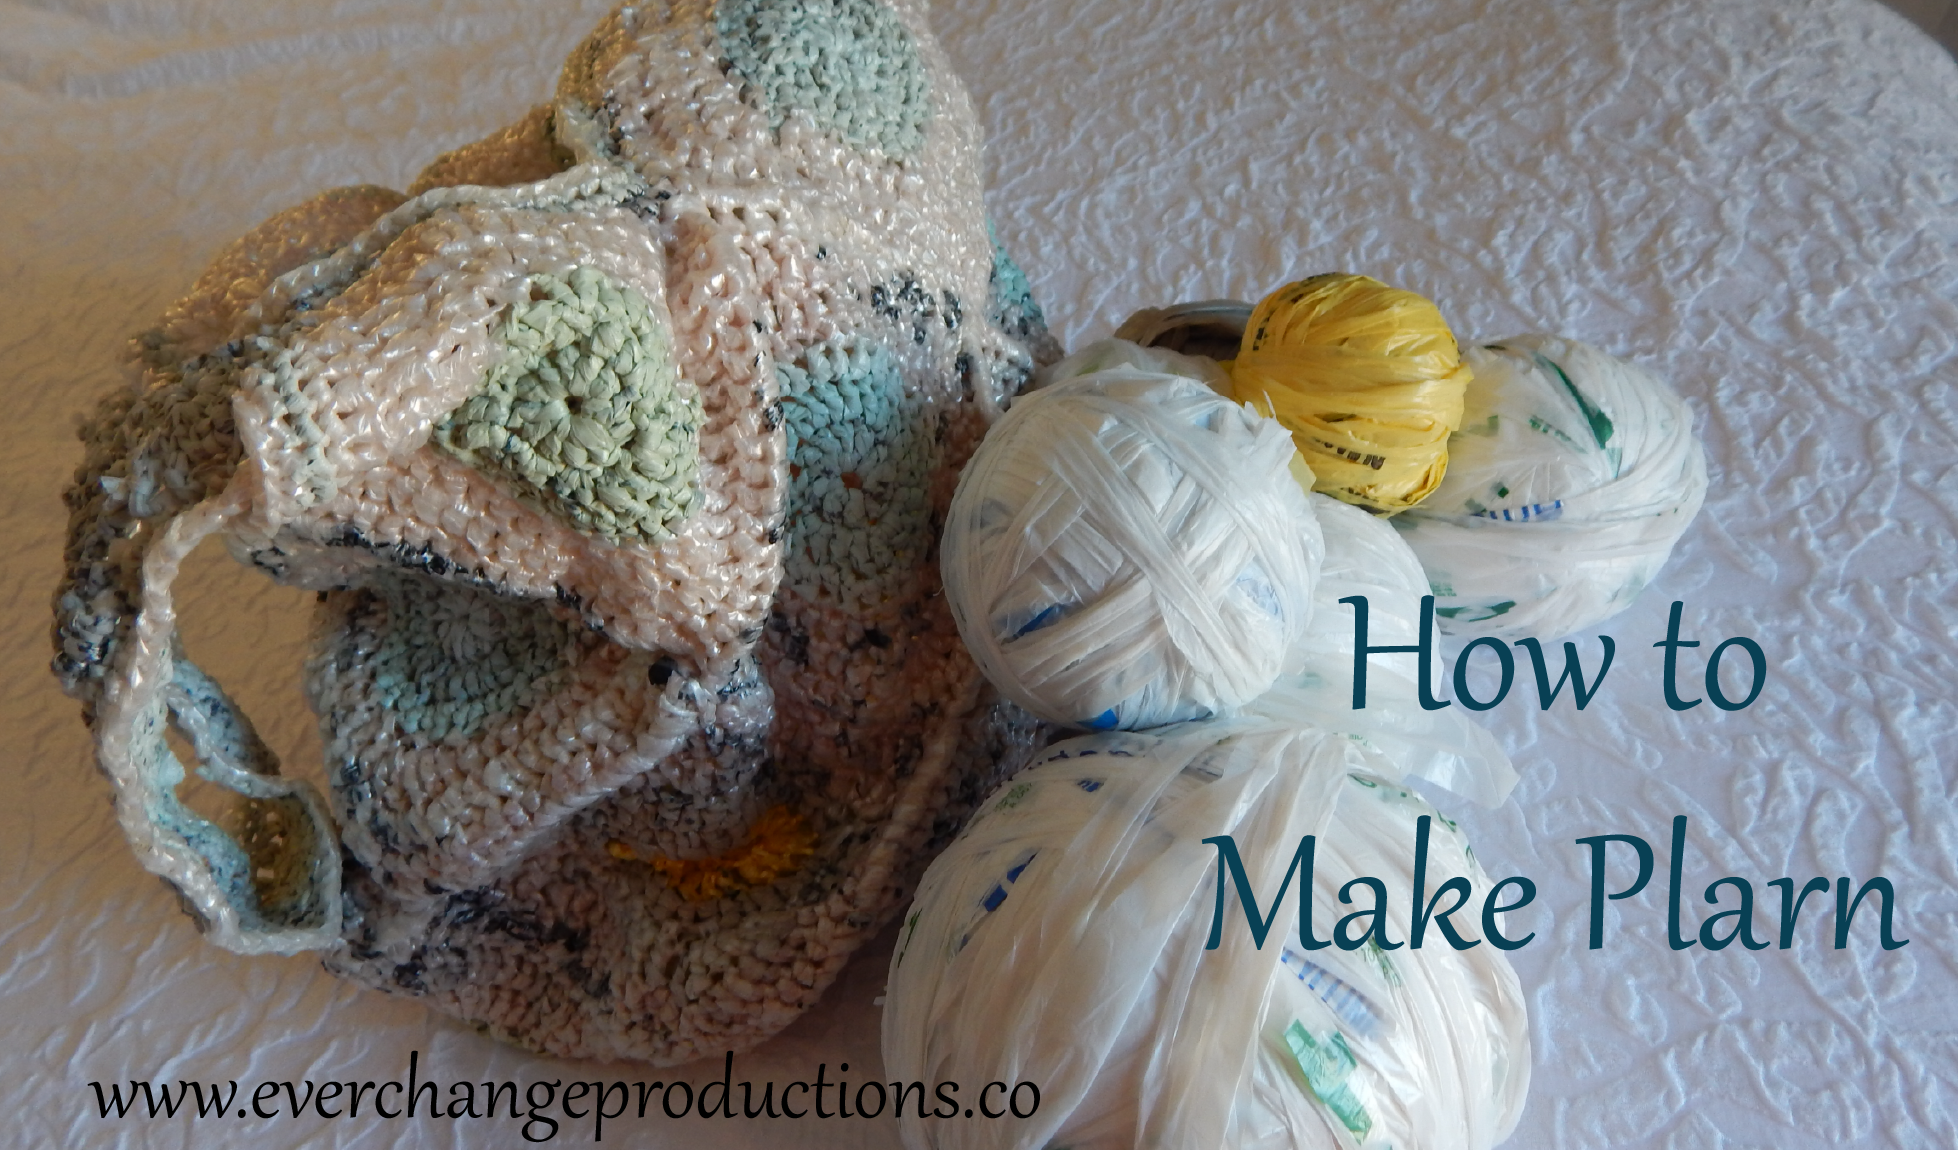 Making plarn is one of my favorite upcycling projects. I've mentioned it quite a few times in various posts, so today I'm going to show to make plarn.